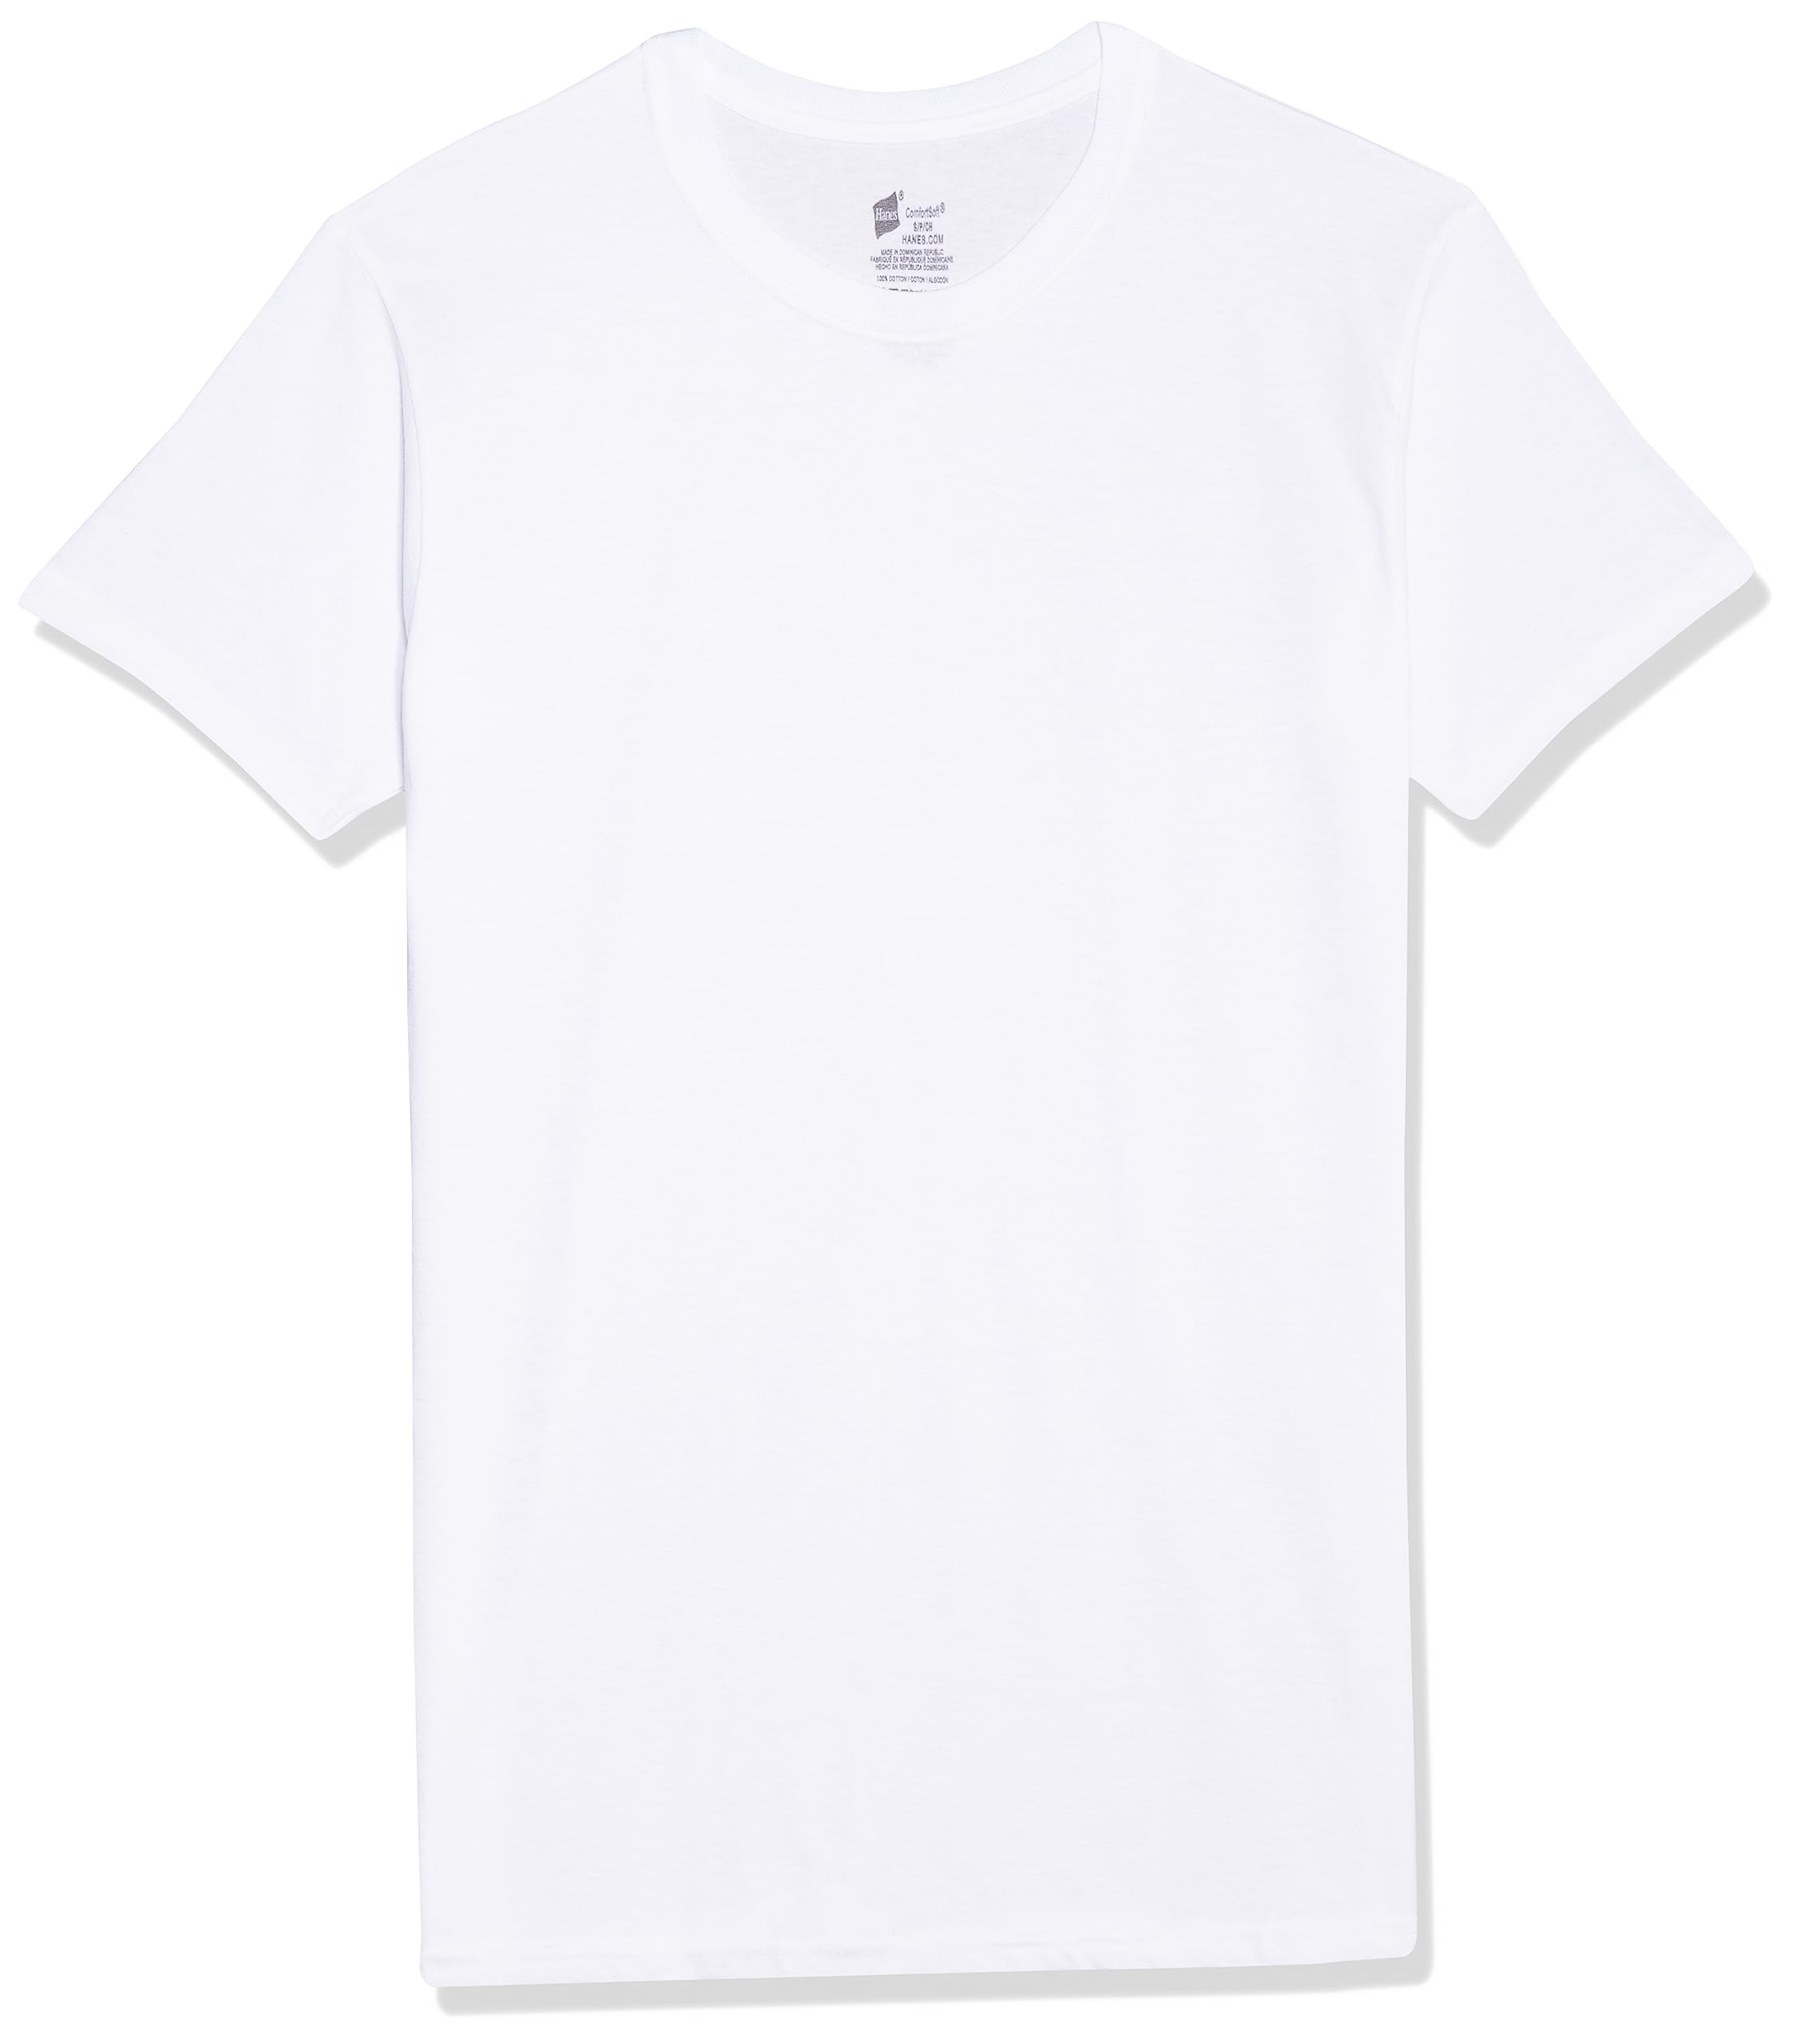 Hanes Men's Tagless Cotton Crew Undershirt – Multiple Packs and Colors